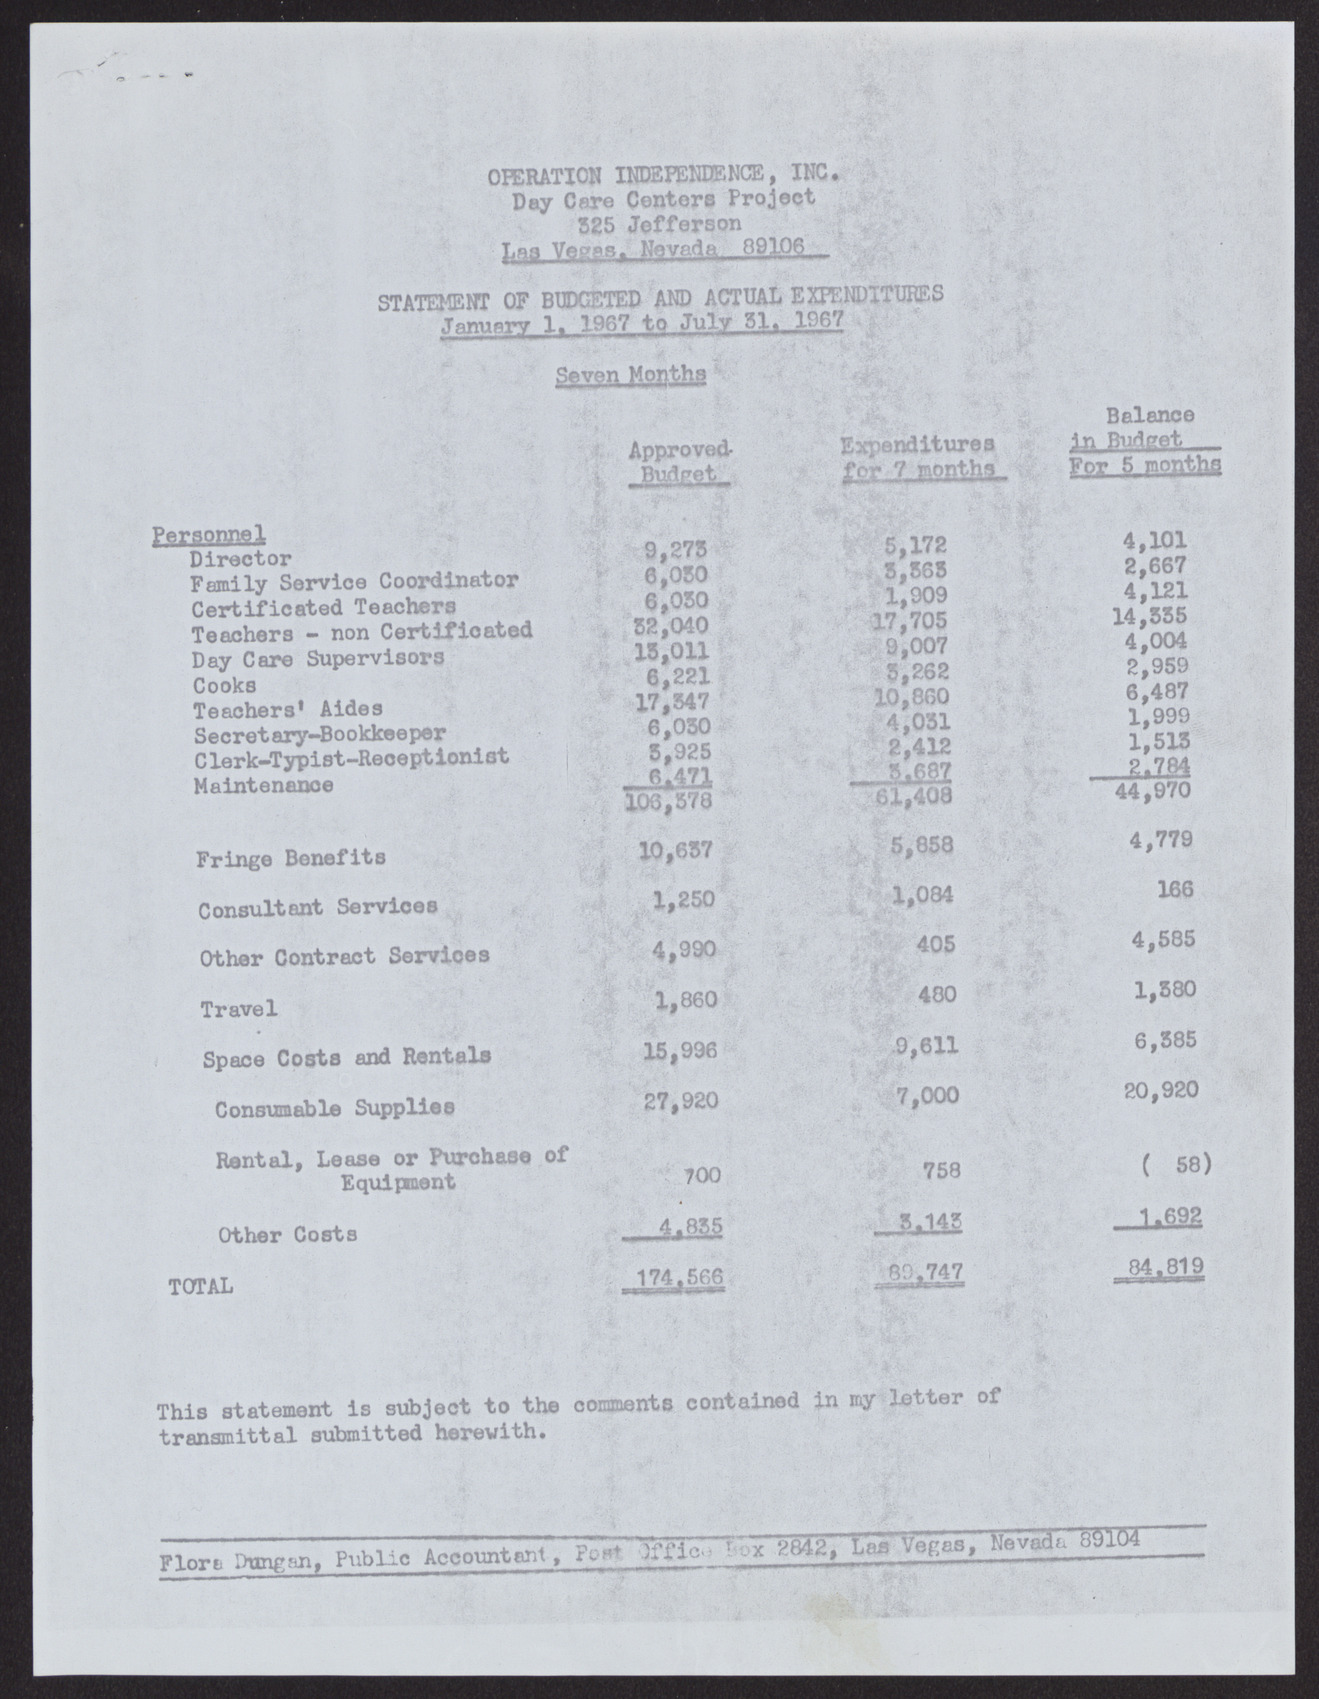 Letter from Flora Dungan and accompanying statements of Receipts and Expenditures and Budgeted and Actual Expenditures (5 pages), August 9, 1967, page 4